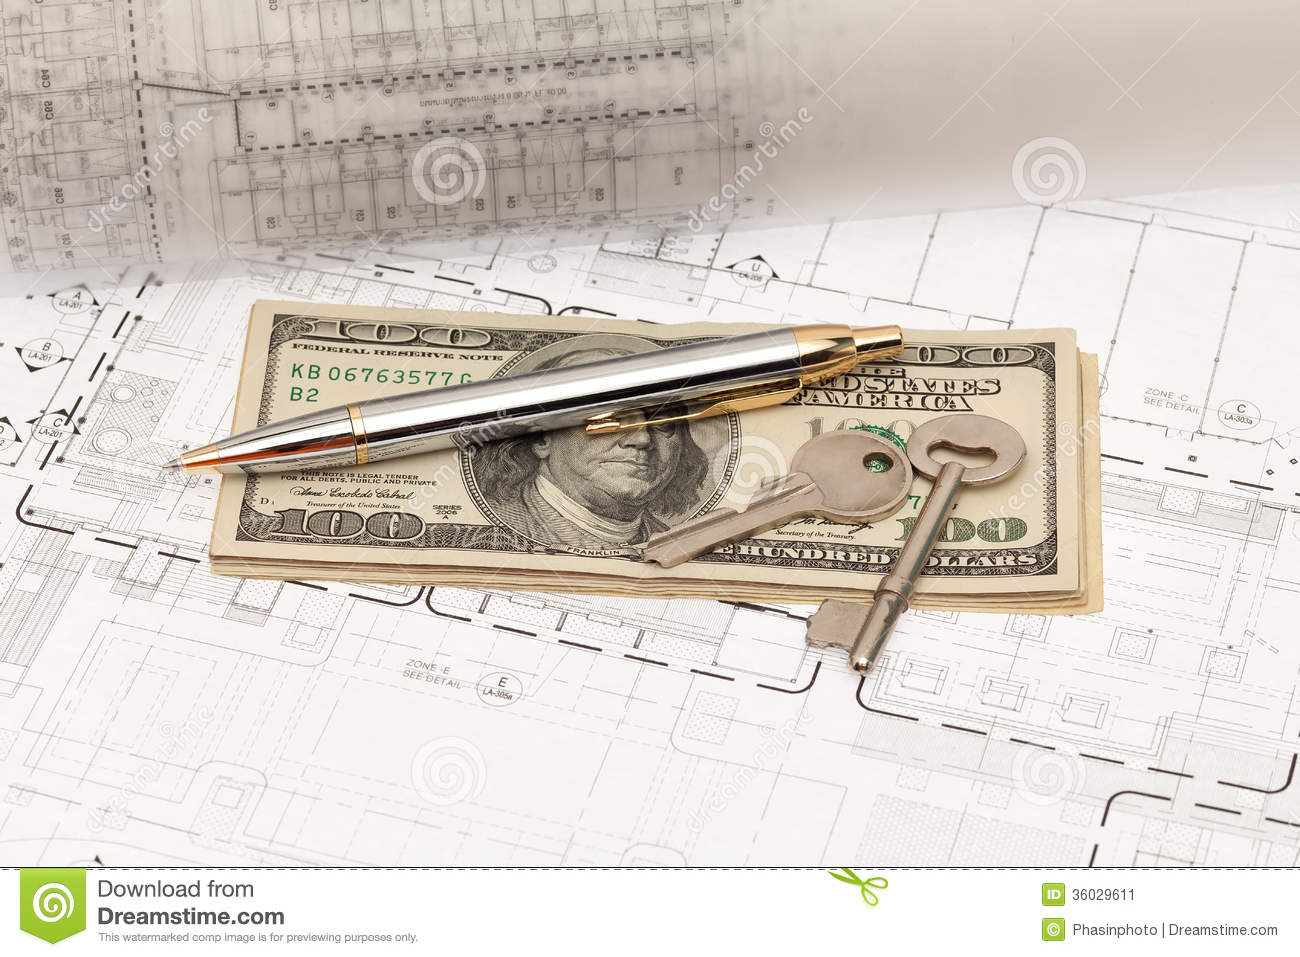 Engineering Project Stock Image   Image  36029611